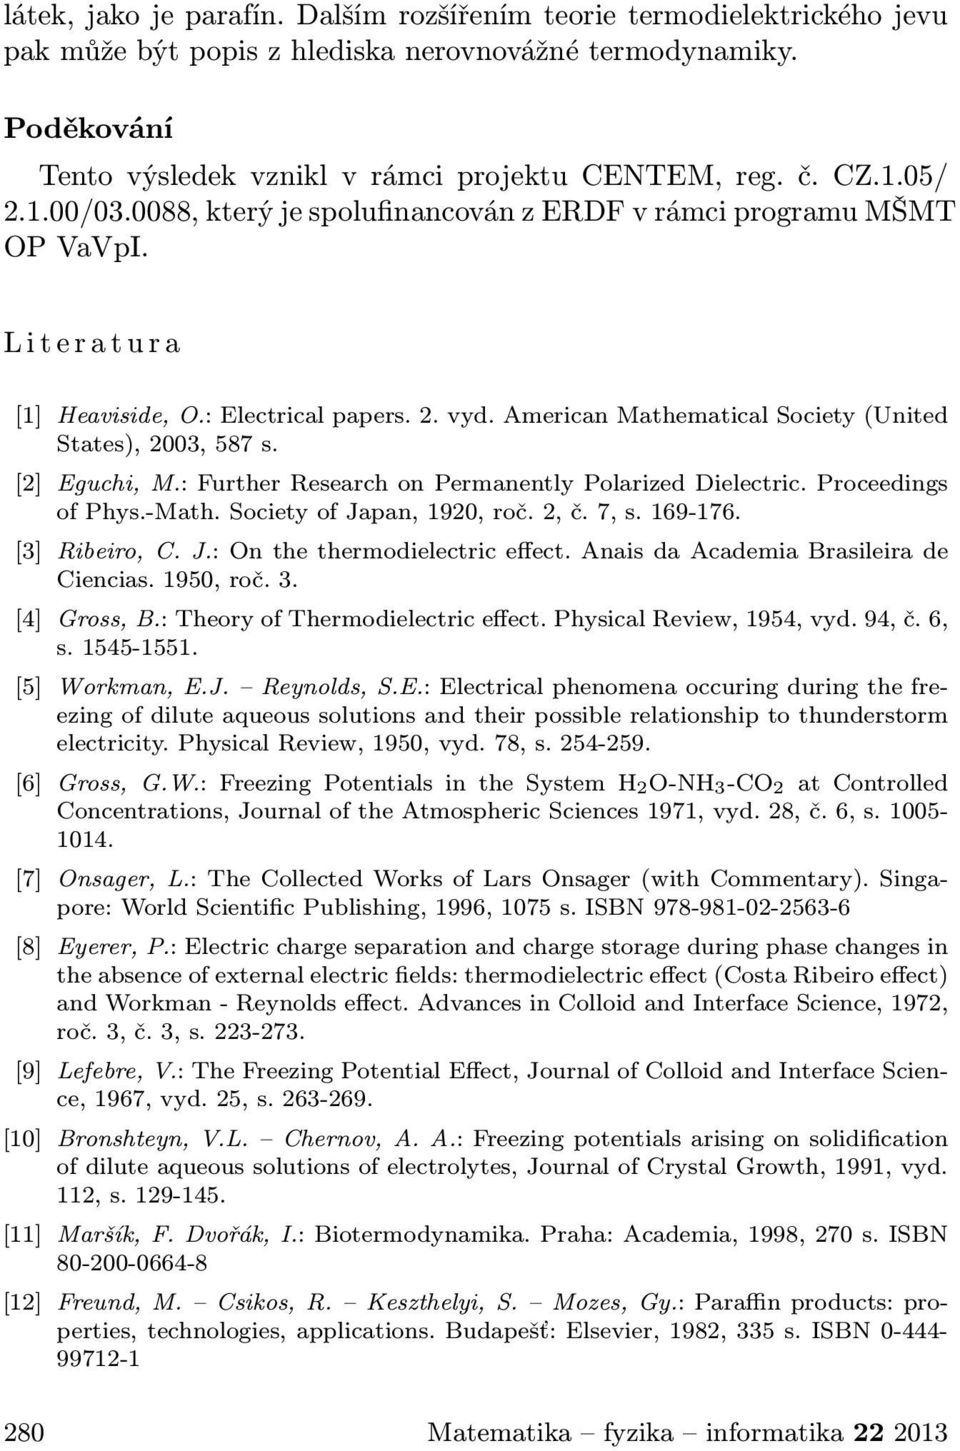 American Mathematical Society (United States), 2003, 587 s. [2] Eguchi, M.: Further Research on Permanently Polarized Dielectric. Proceedings of Phys.-Math. Society of Japan, 1920, roč. 2, č. 7, s.